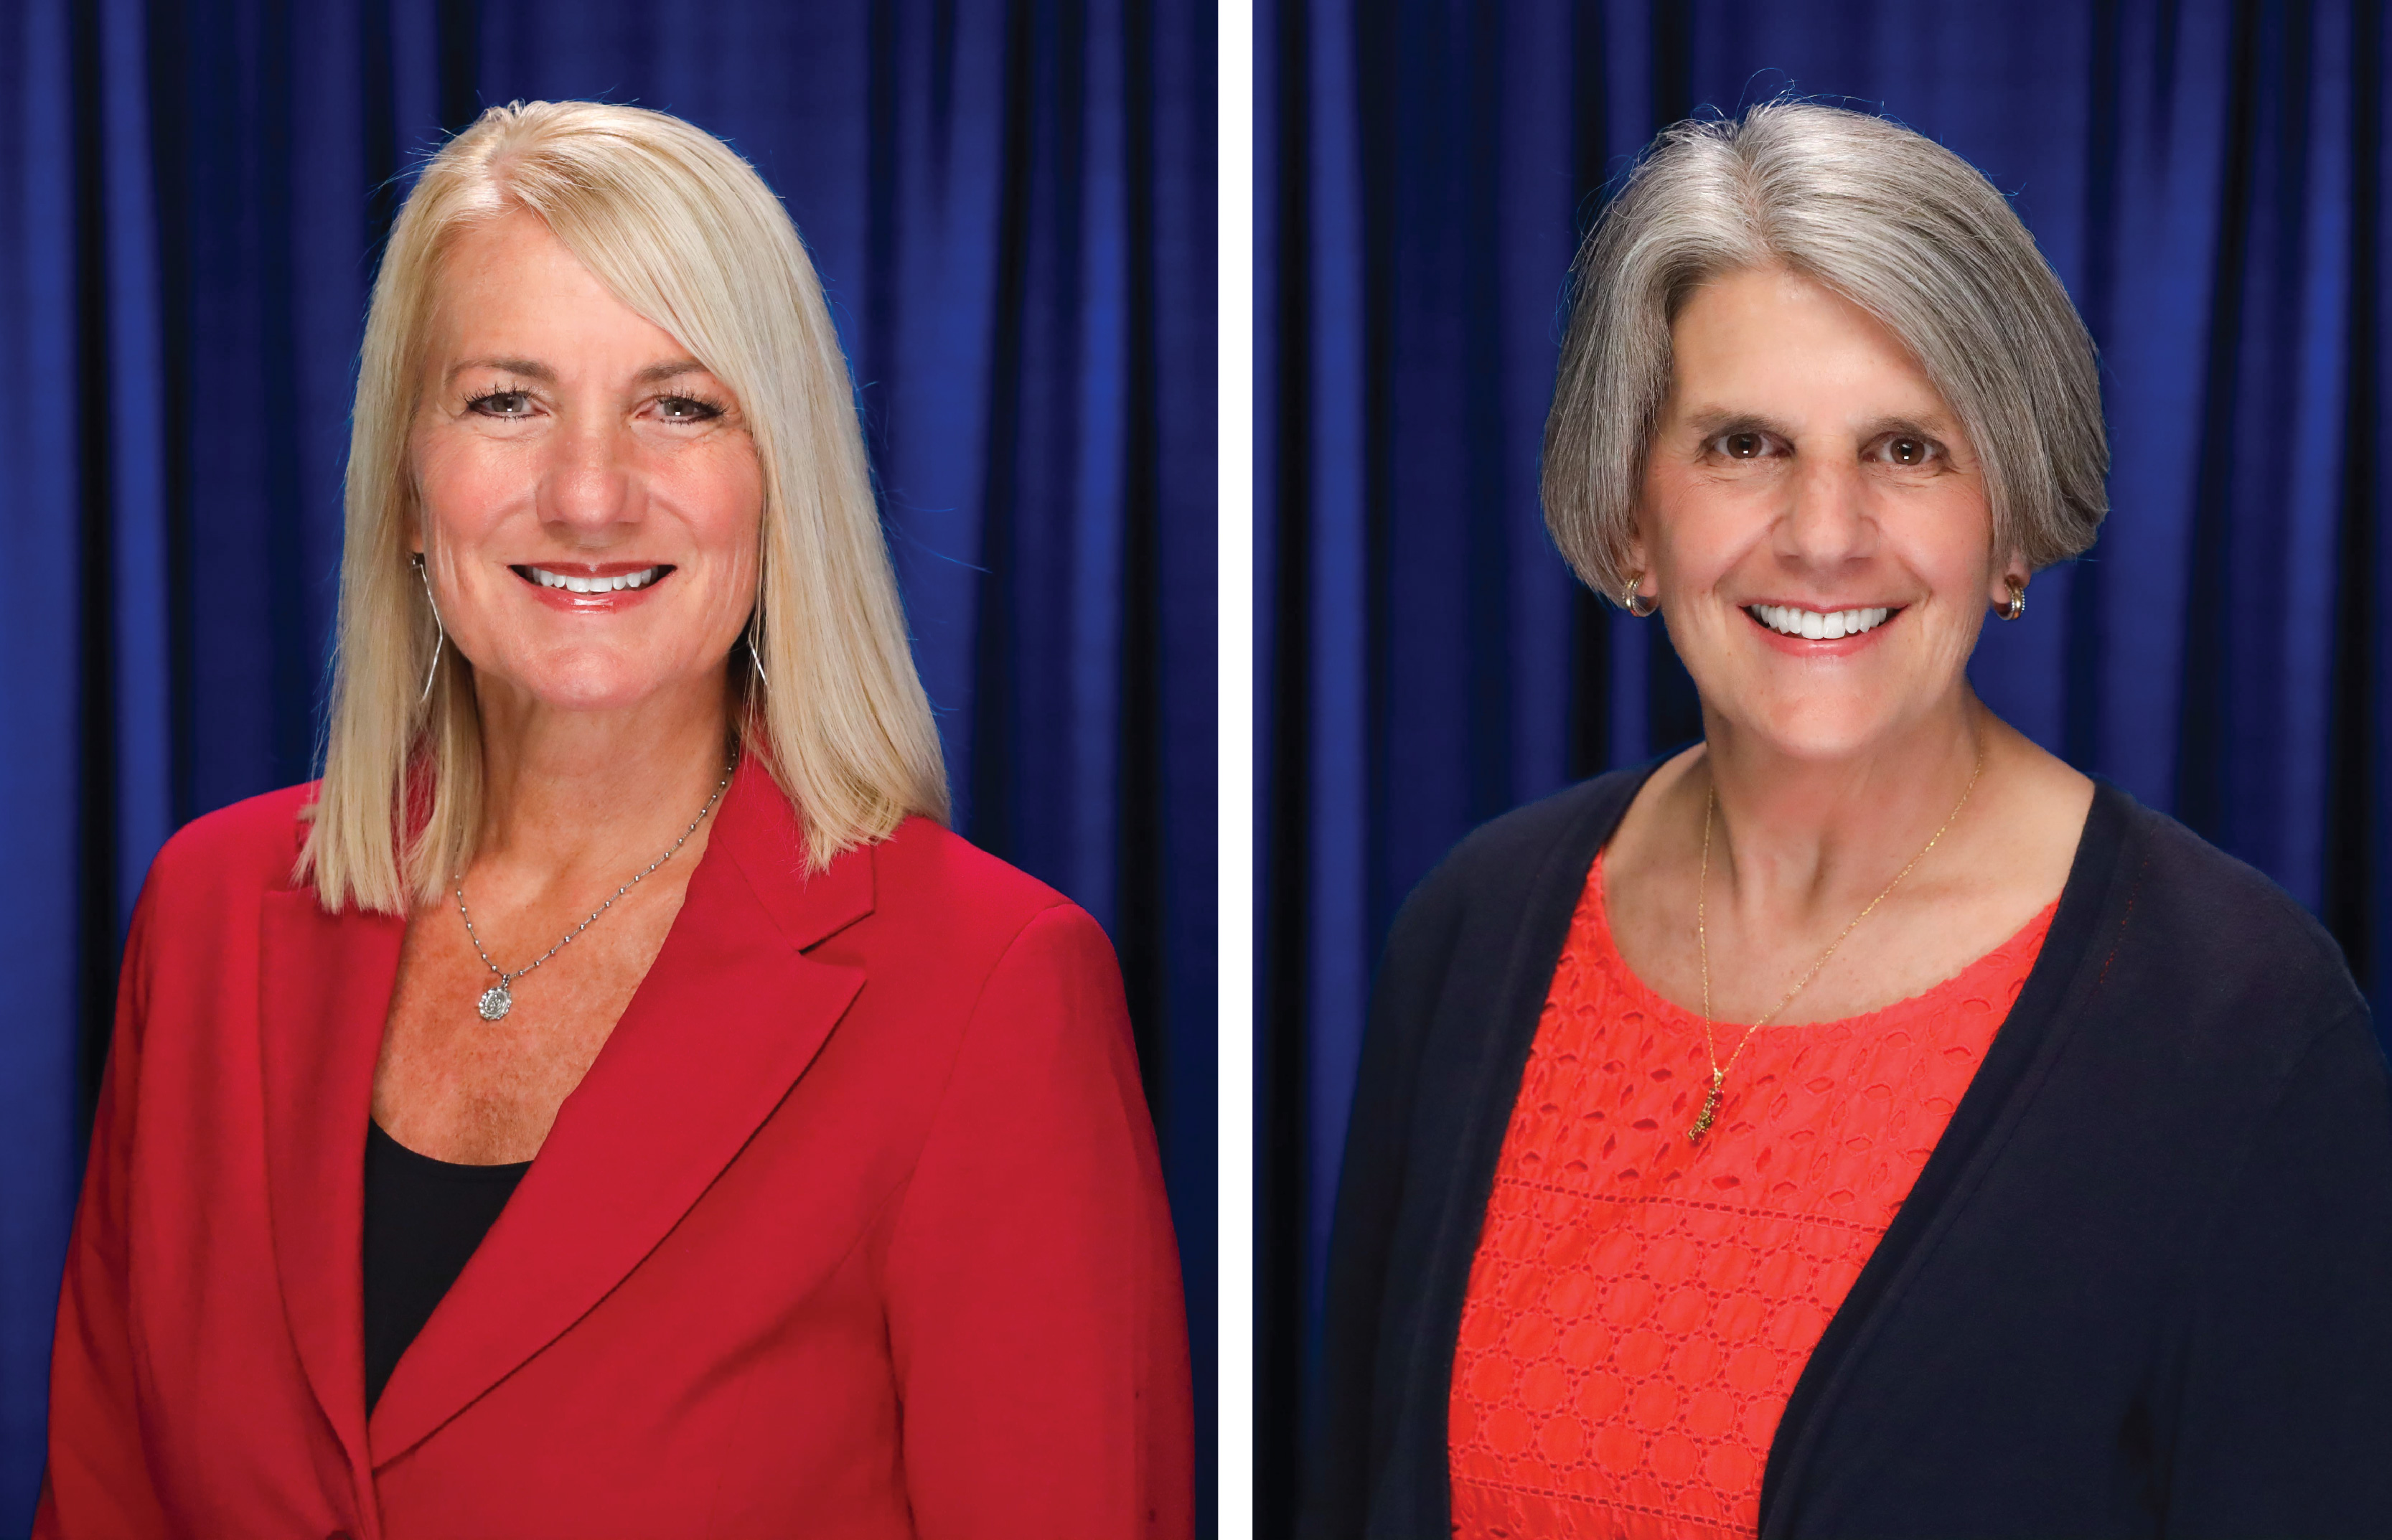 Katy ISD Welcomes Two New Assistant Superintendents for Elementary School Leadership